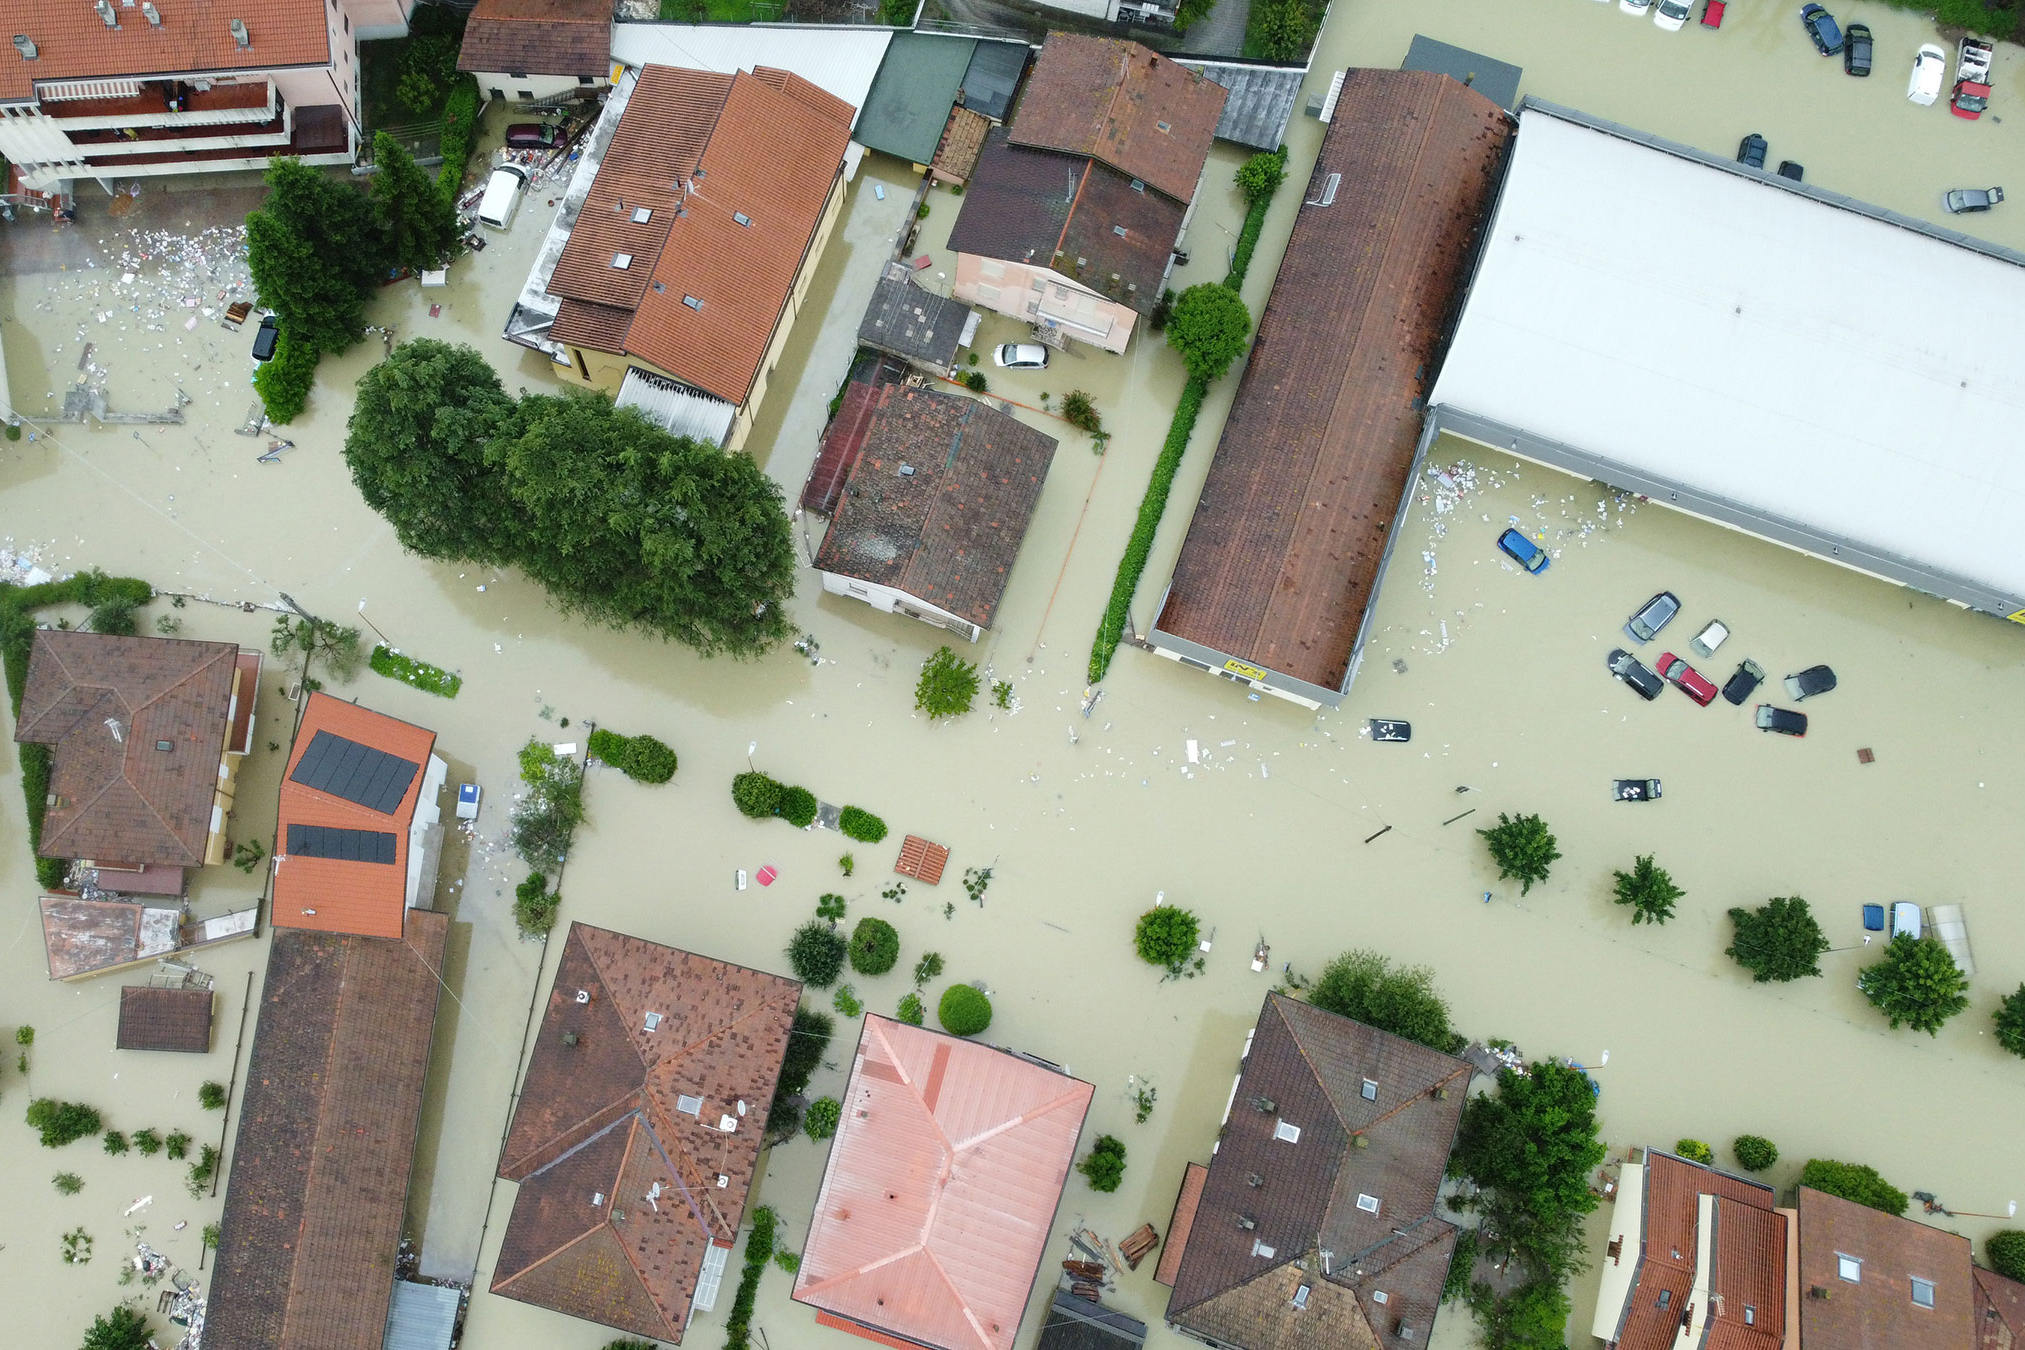 An overhead view of the flooding in Cesena on May 17.